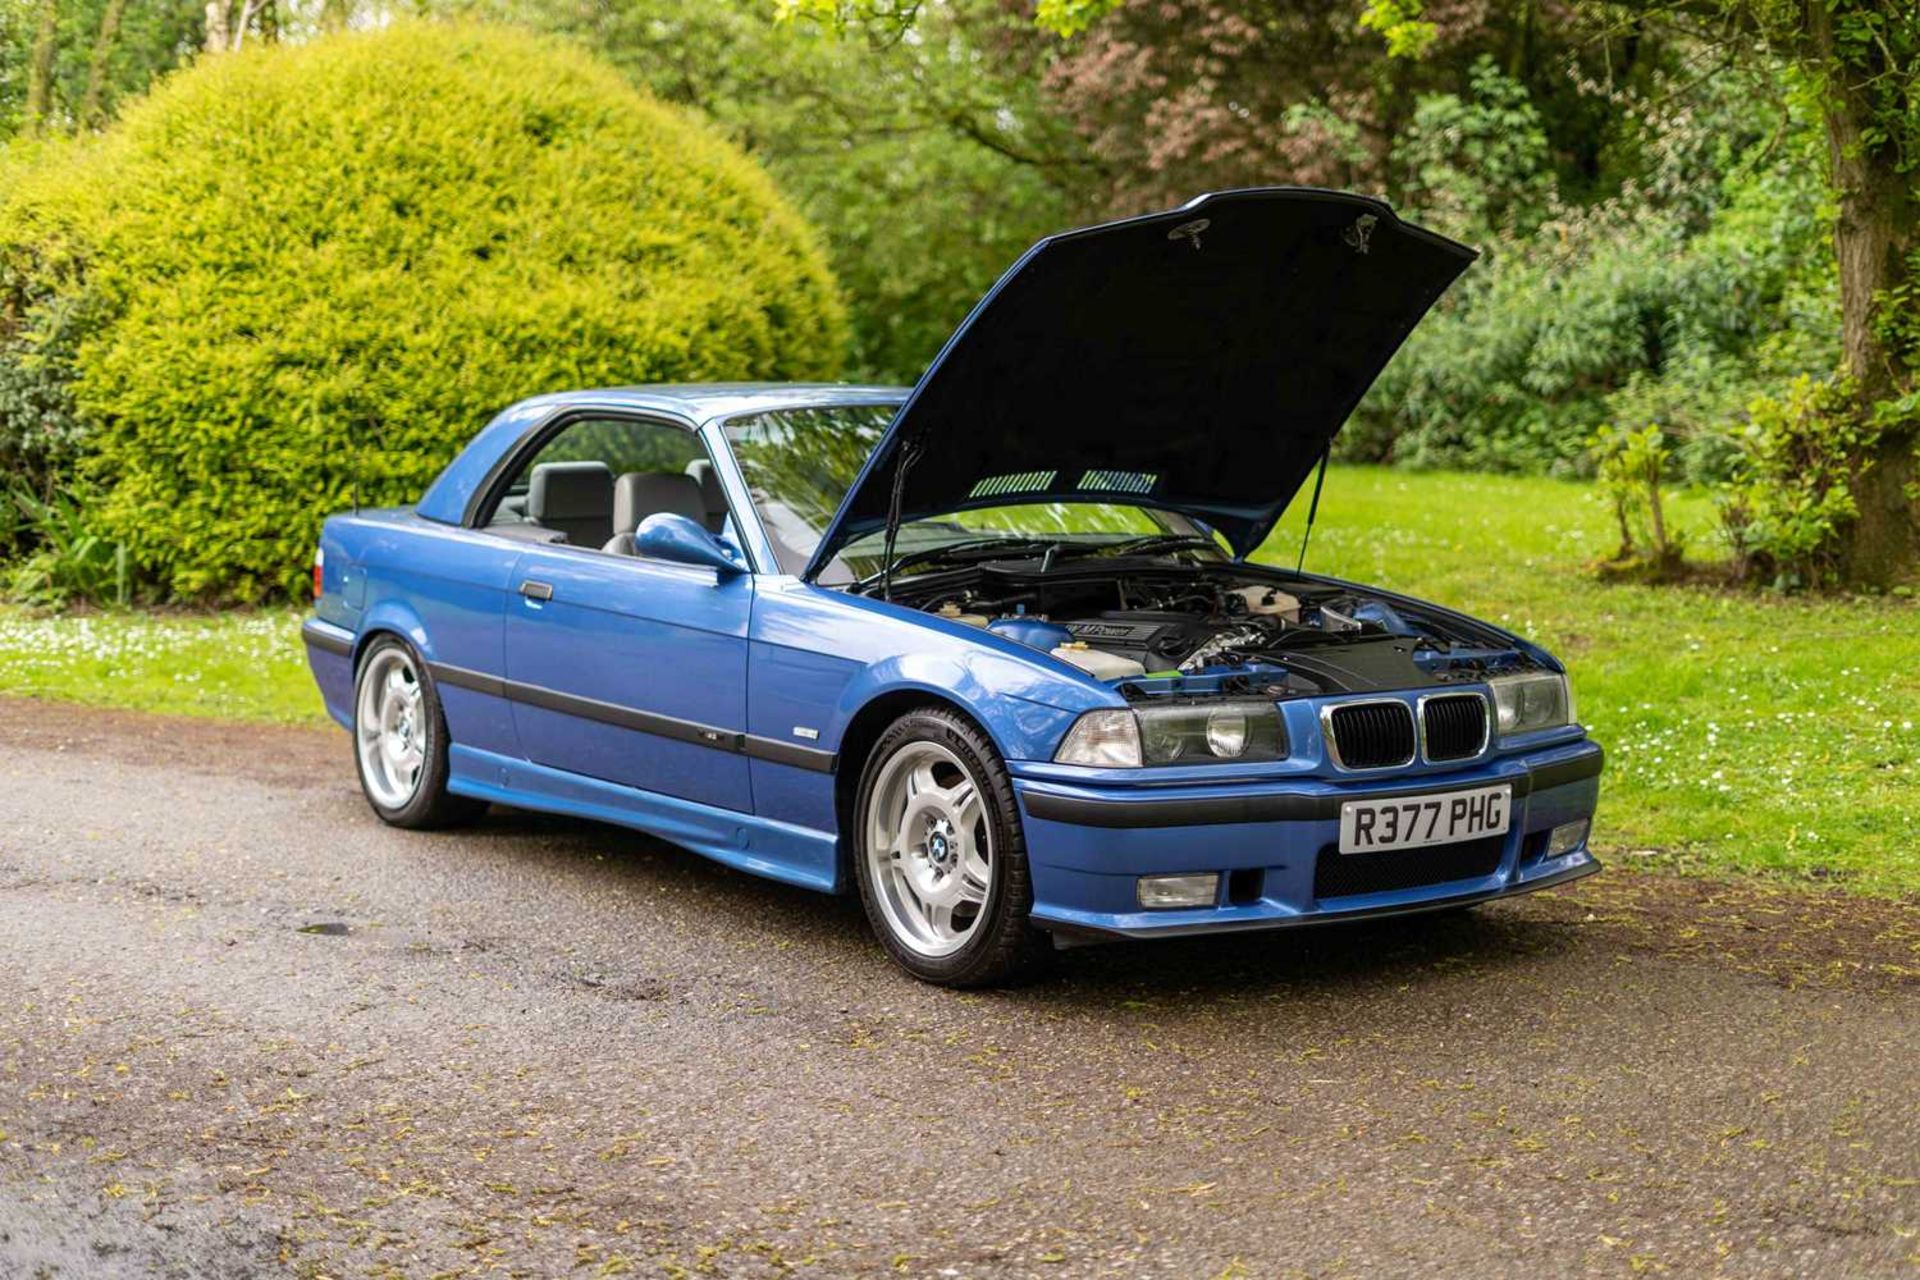 1998 BMW M3 Evolution Convertible Only 54,000 miles and full service history - Image 67 of 89